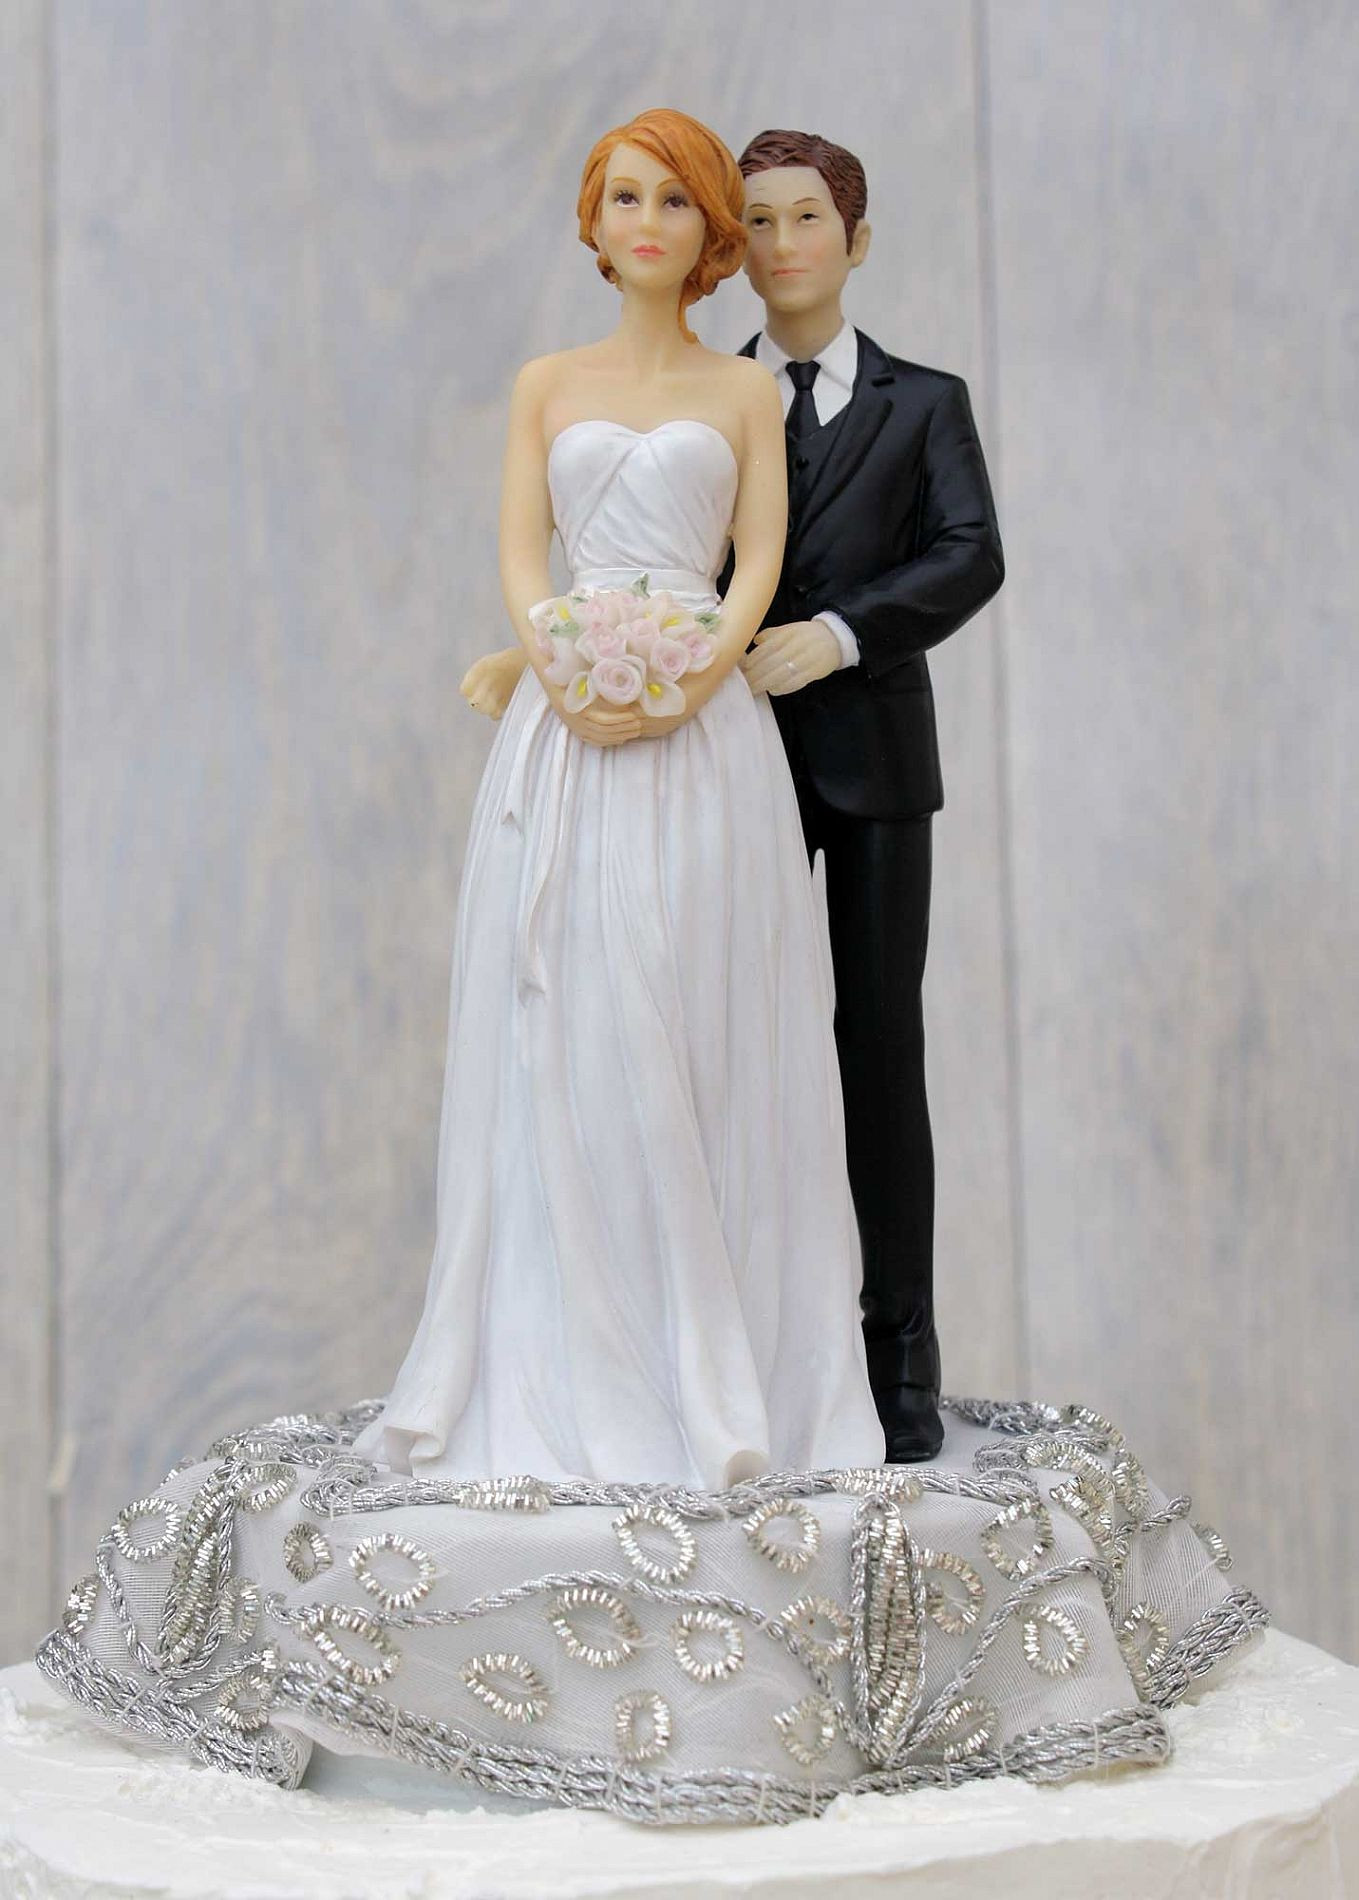 Wedding Cakes Bride And Groom
 Bride and groom wedding cake toppers idea in 2017